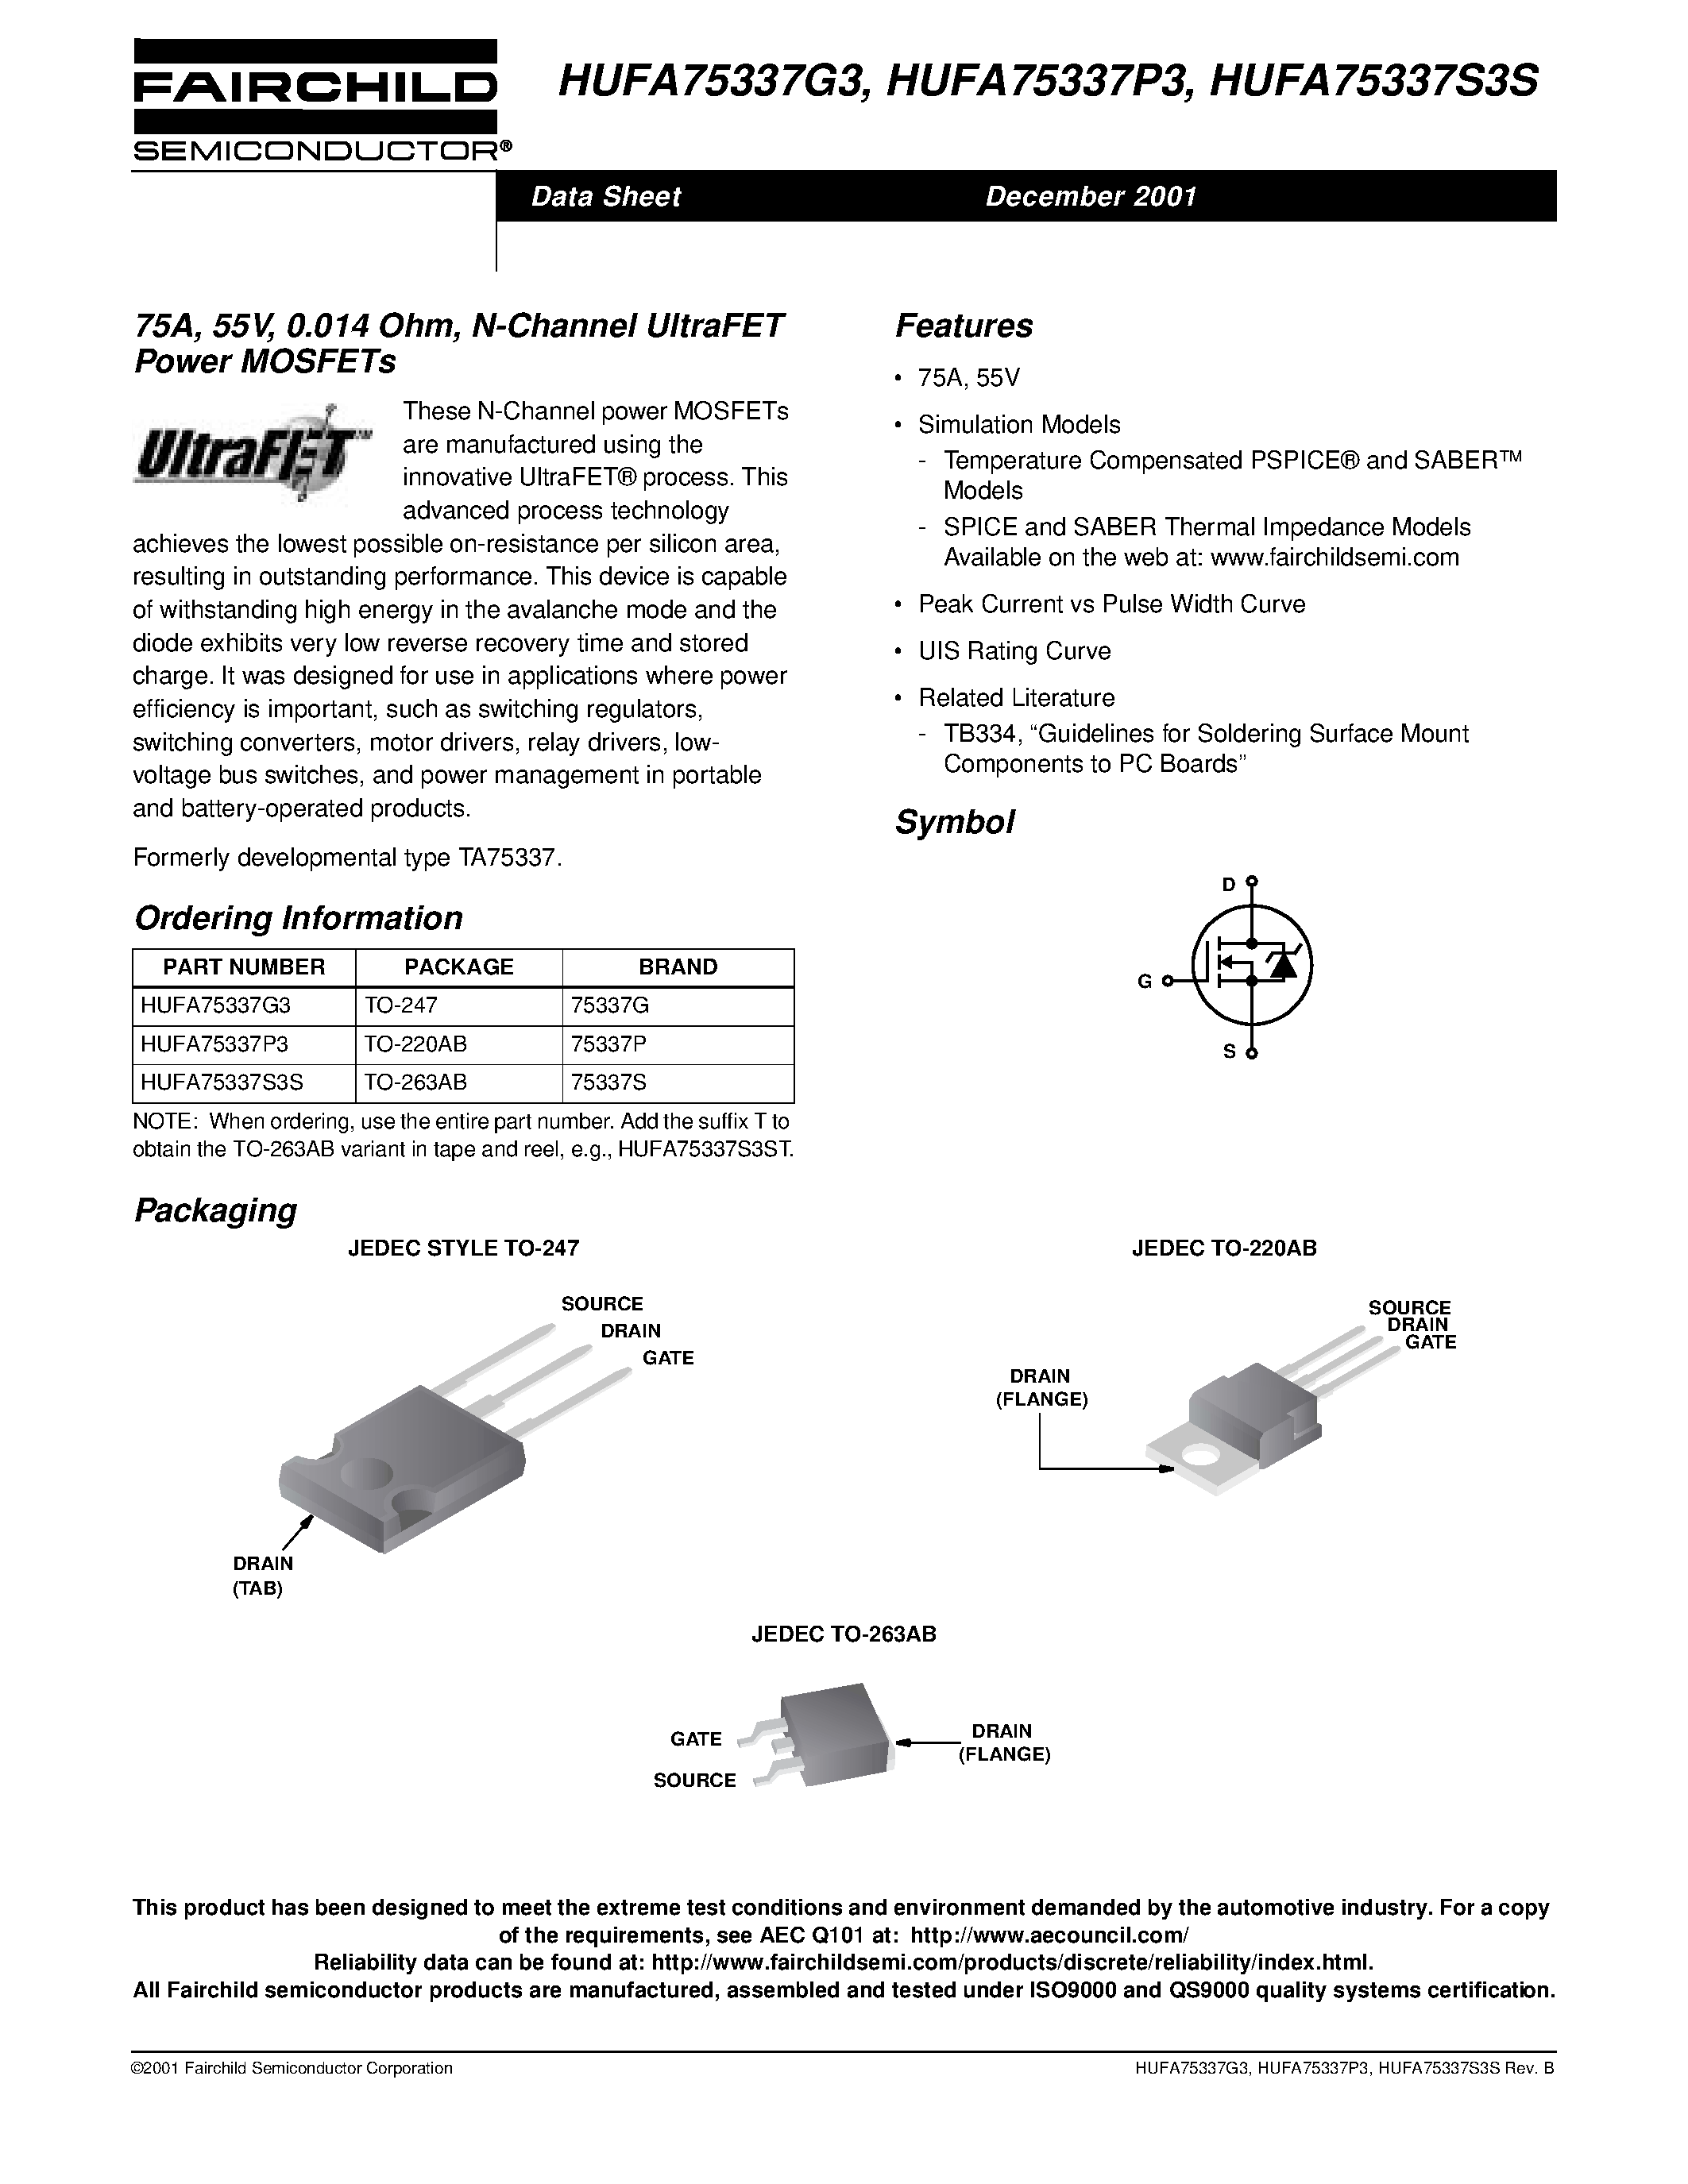 Datasheet HUFA75339G3 - 75A/ 55V/ 0.012 Ohm/ N-Channel UltraFET Power MOSFETs page 1